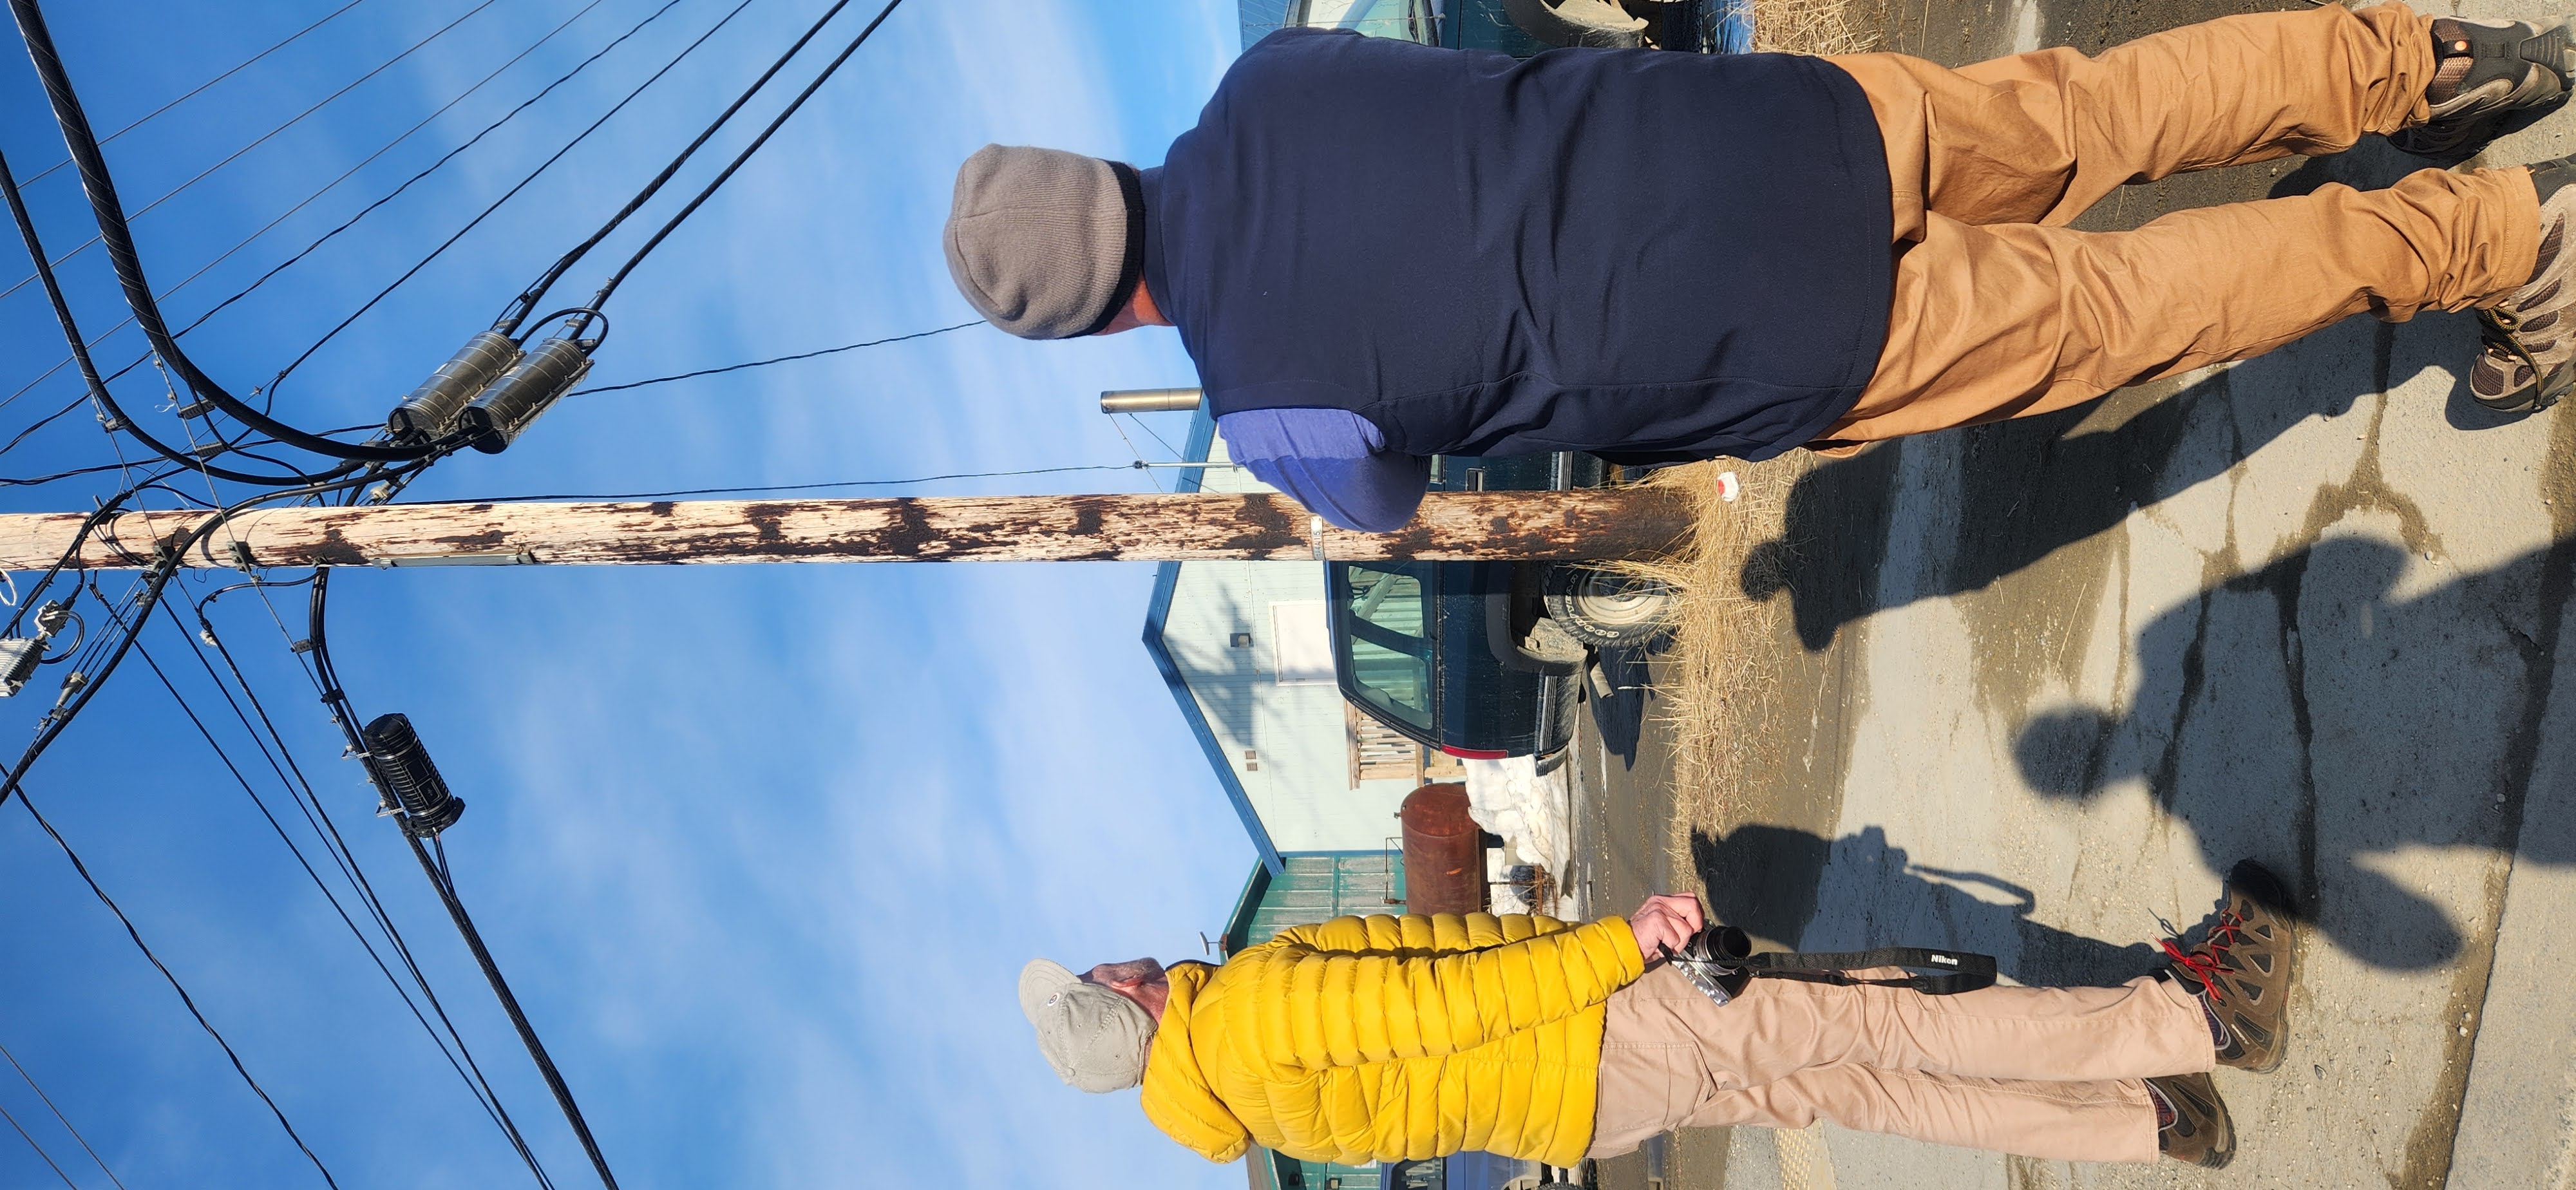 David Edwards and Peter Kempster take interest in the different power pole configuration in Kotzebue.